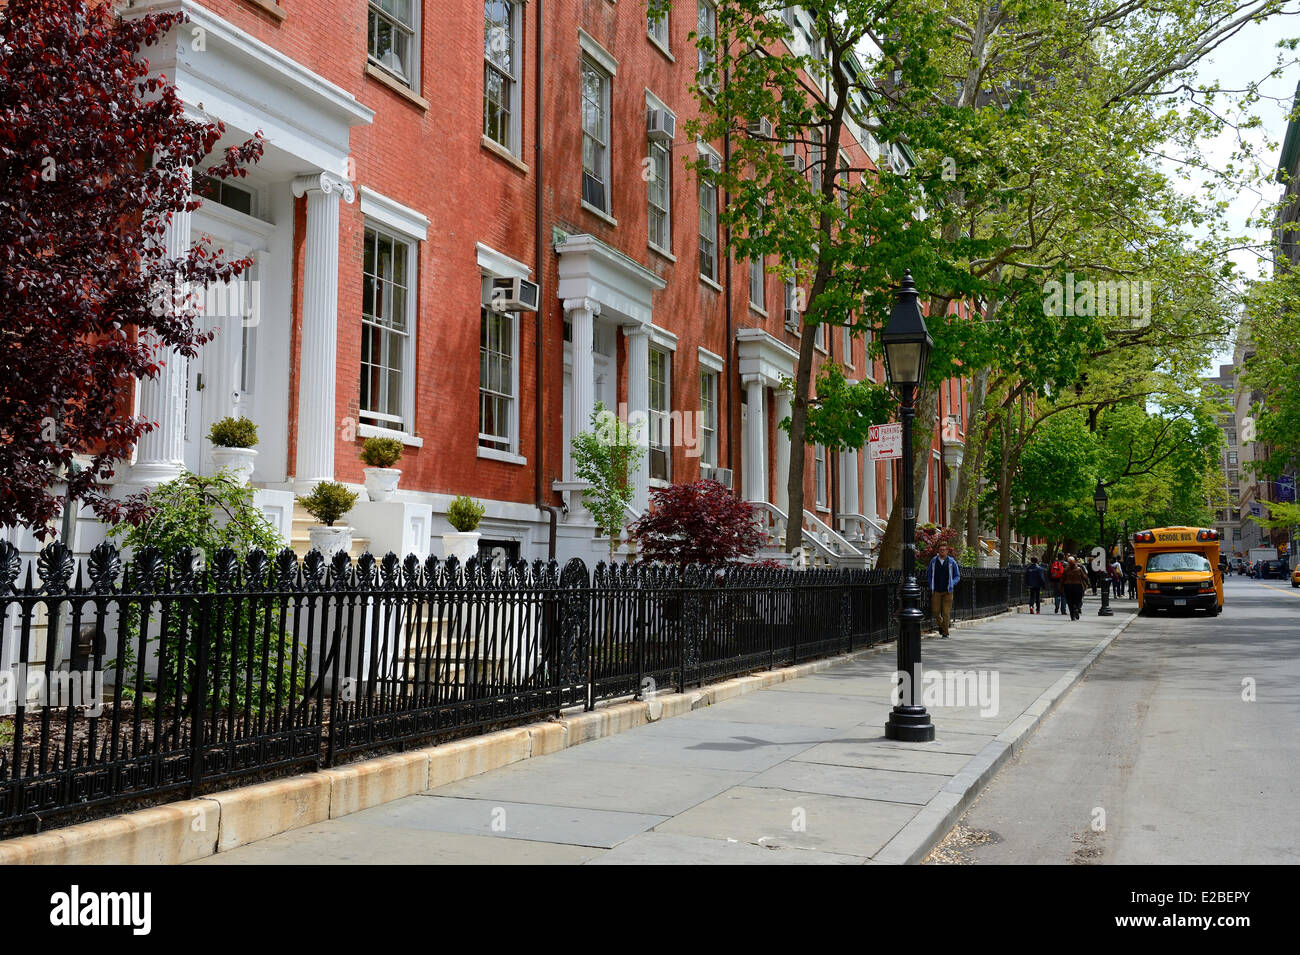 United States, New York City, Manhattan, Greenwich Village, Washington Square North street, townhouses of greek revival style from 1830 Stock Photo